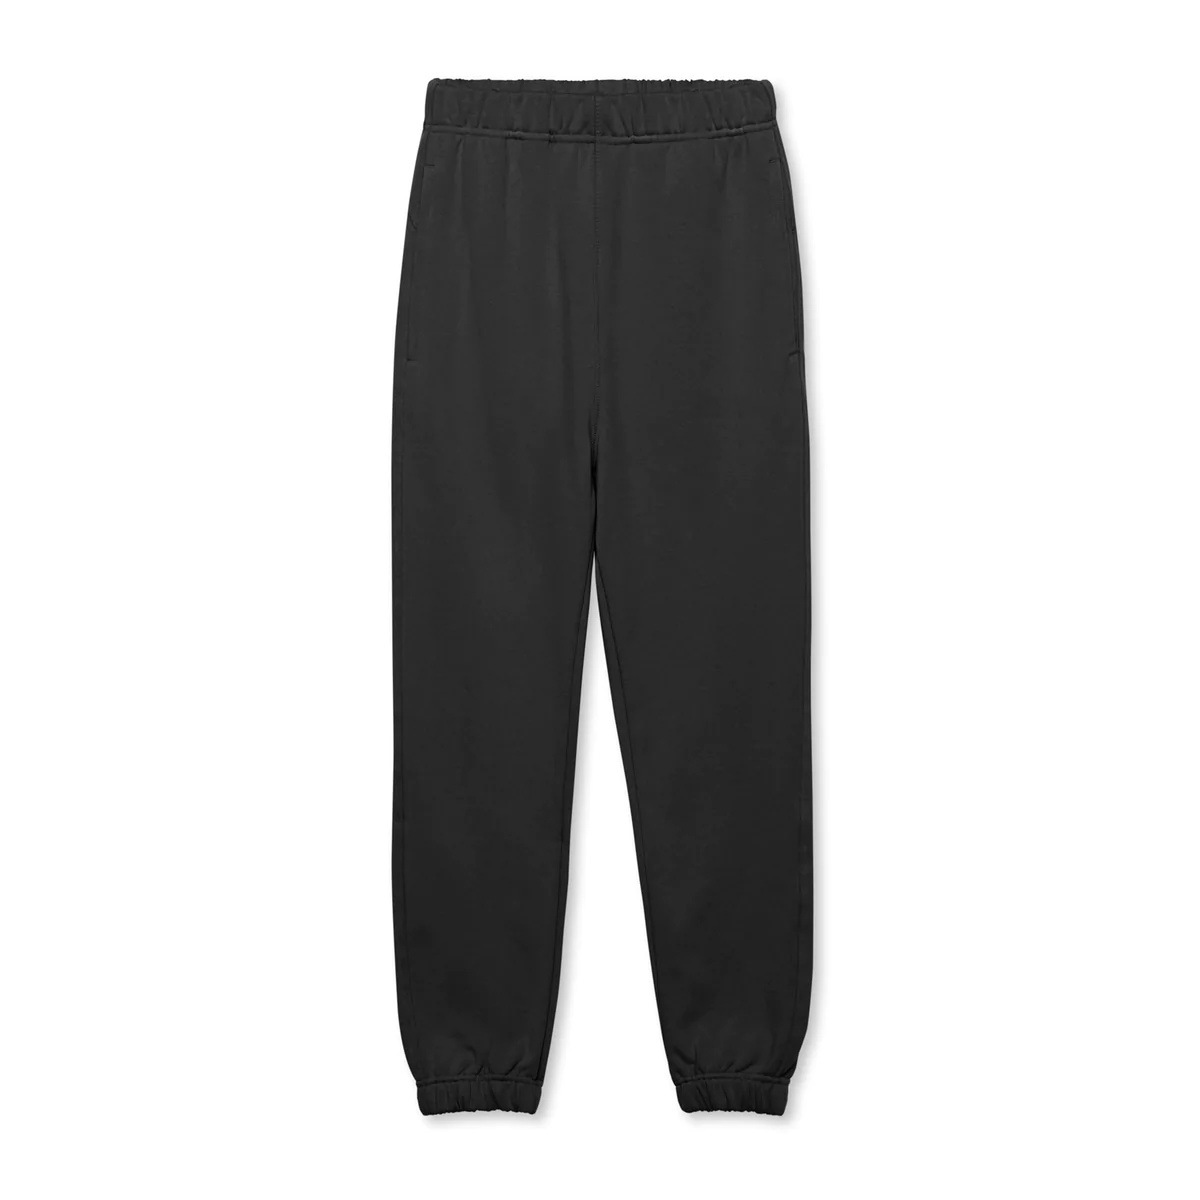  Men's Loose-Fit Athletic Pants for Casual Fitness